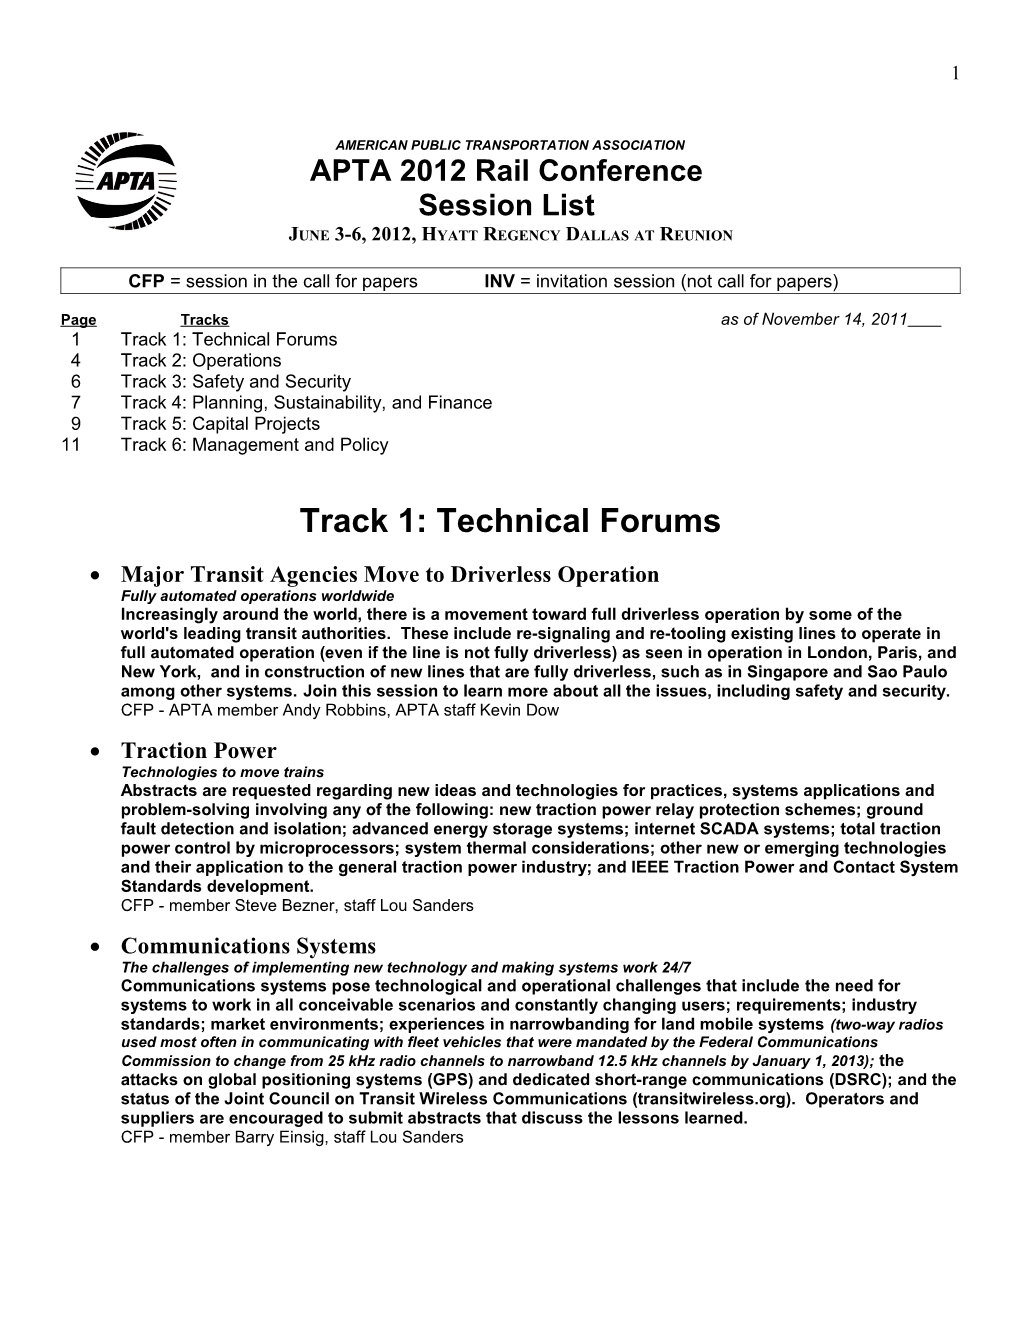 Rail Conference Planning Subcommittee - 2012 Session List